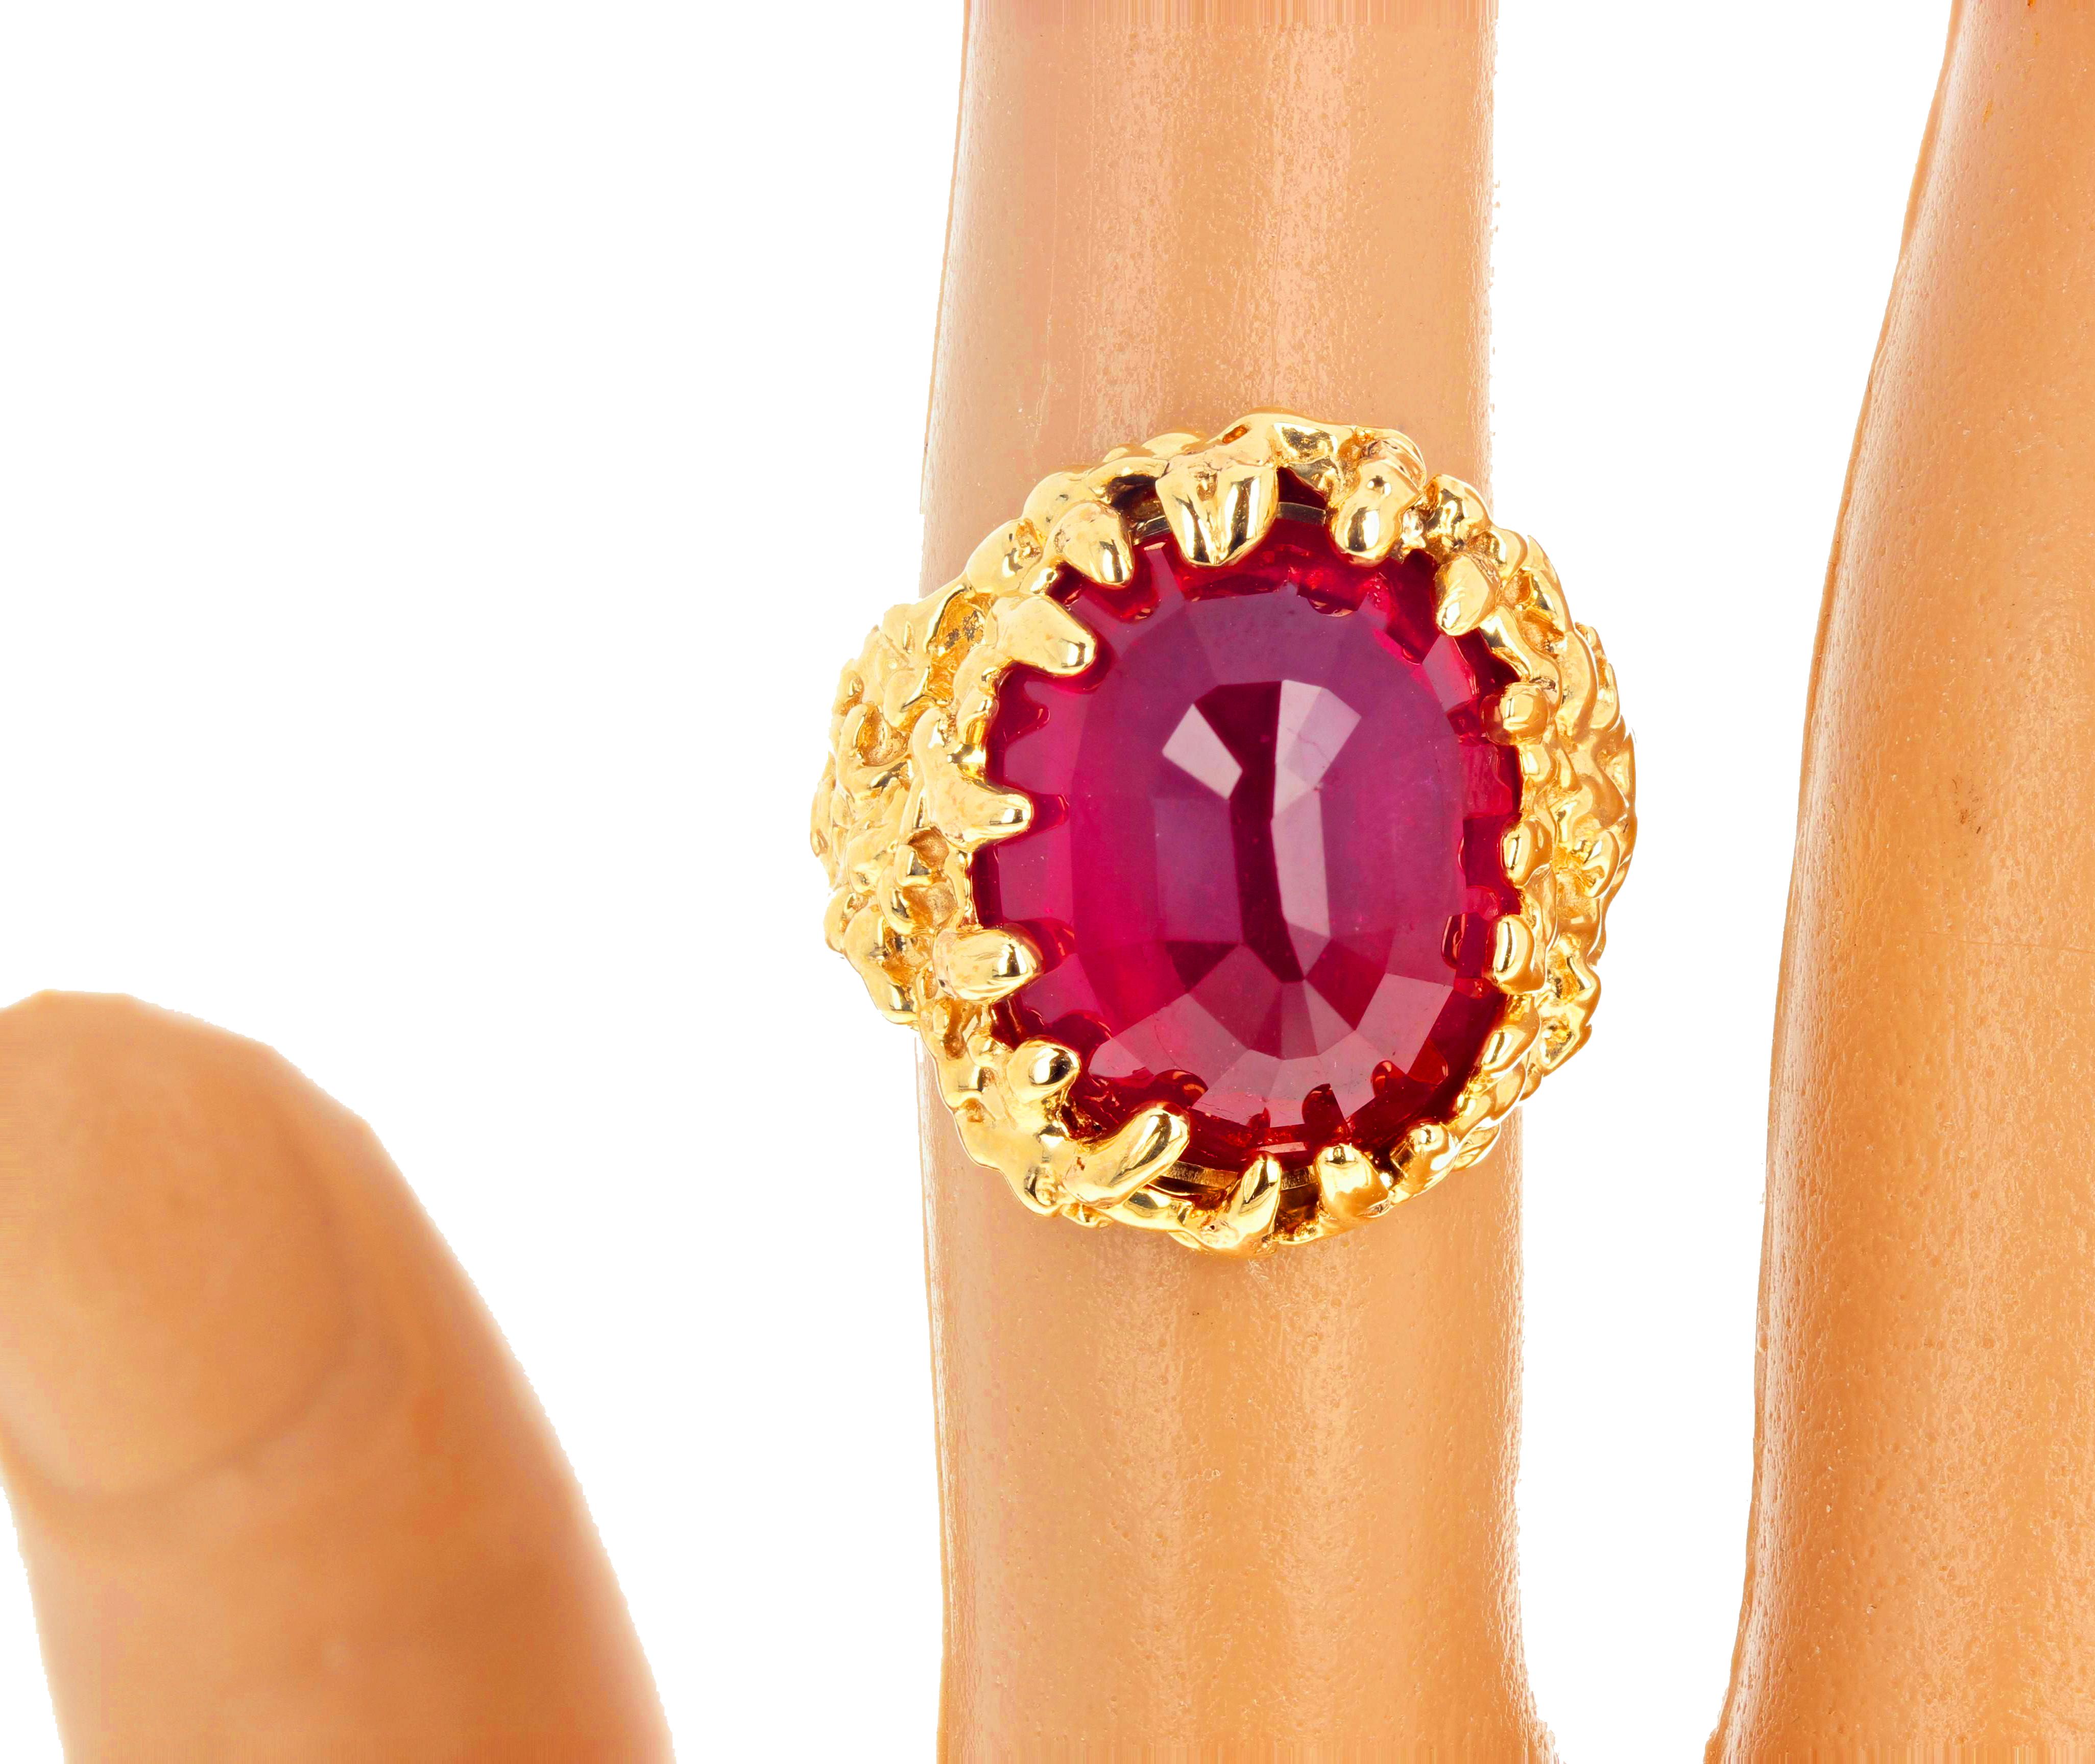 Oval Cut AJD Dramatic Impressive Huge 14 Ct. Ruby in 14 Kt Yellow Gold Cocktail Ring For Sale